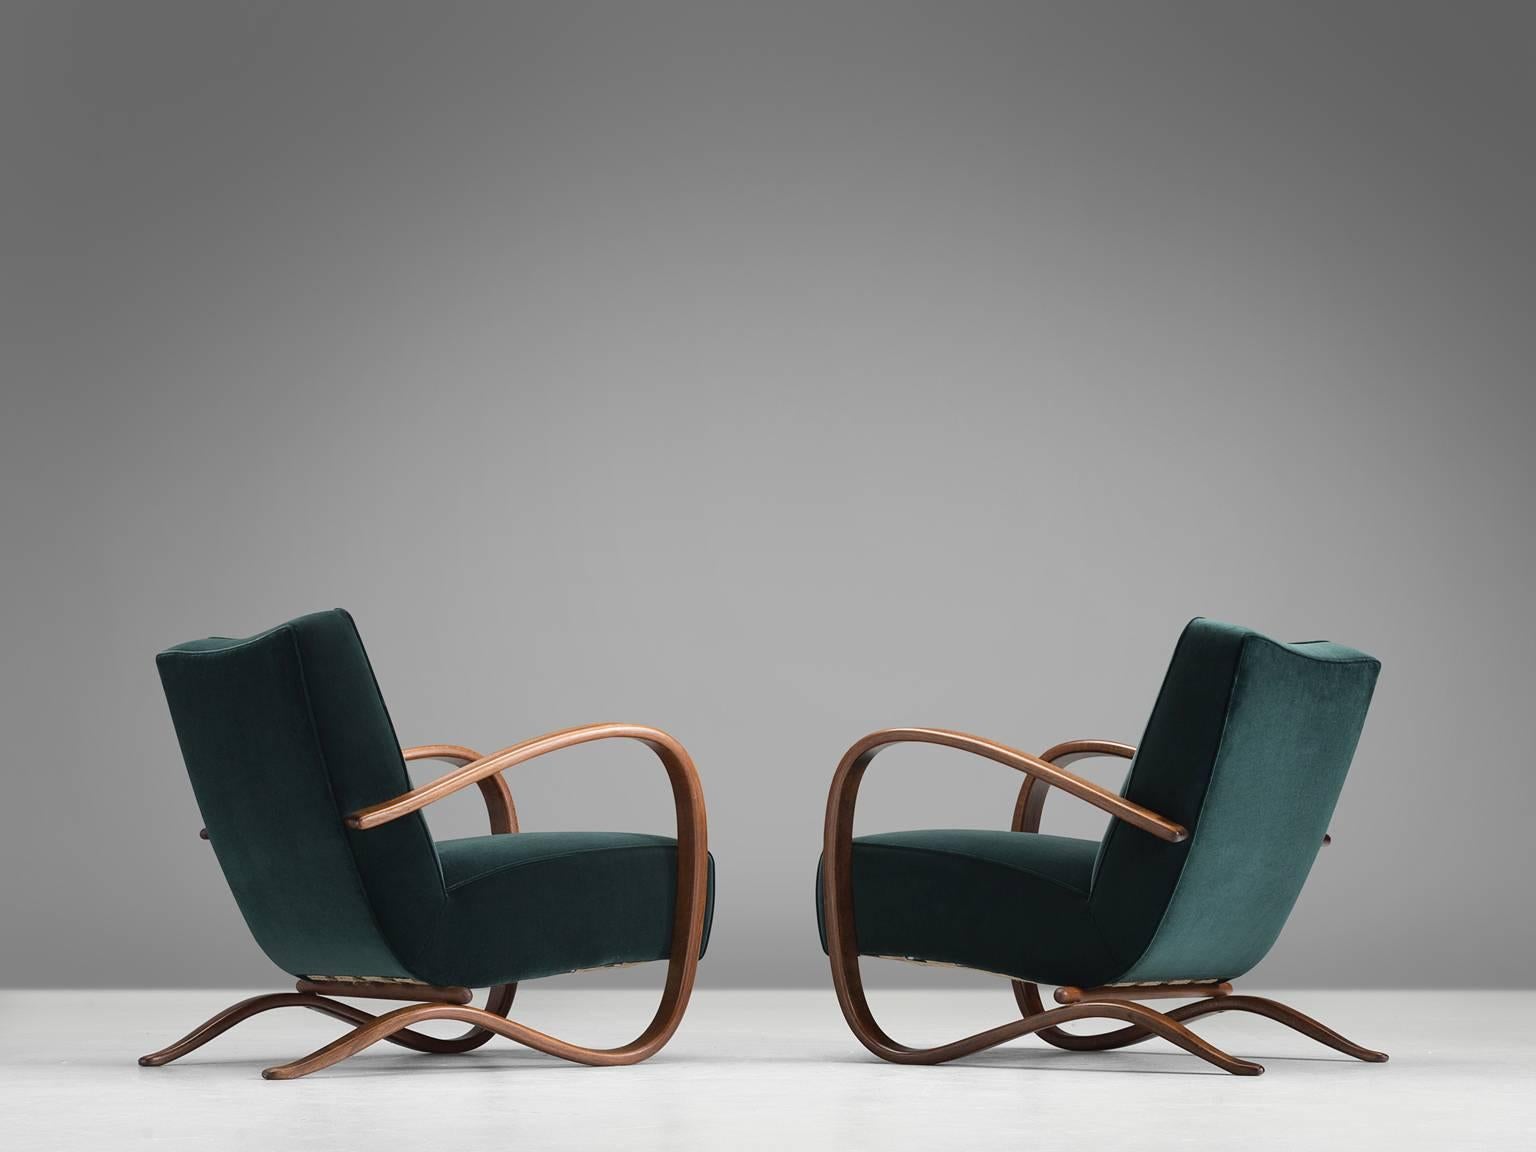 Set of two lounge chairs, in deep green velvet and stained beech, by Jindrich Halabala, Czech Republic, 1930s. 

Extraordinary pair of easy chairs with dark green velours upholstery. These chairs have a very dynamic appearance. This dreamy